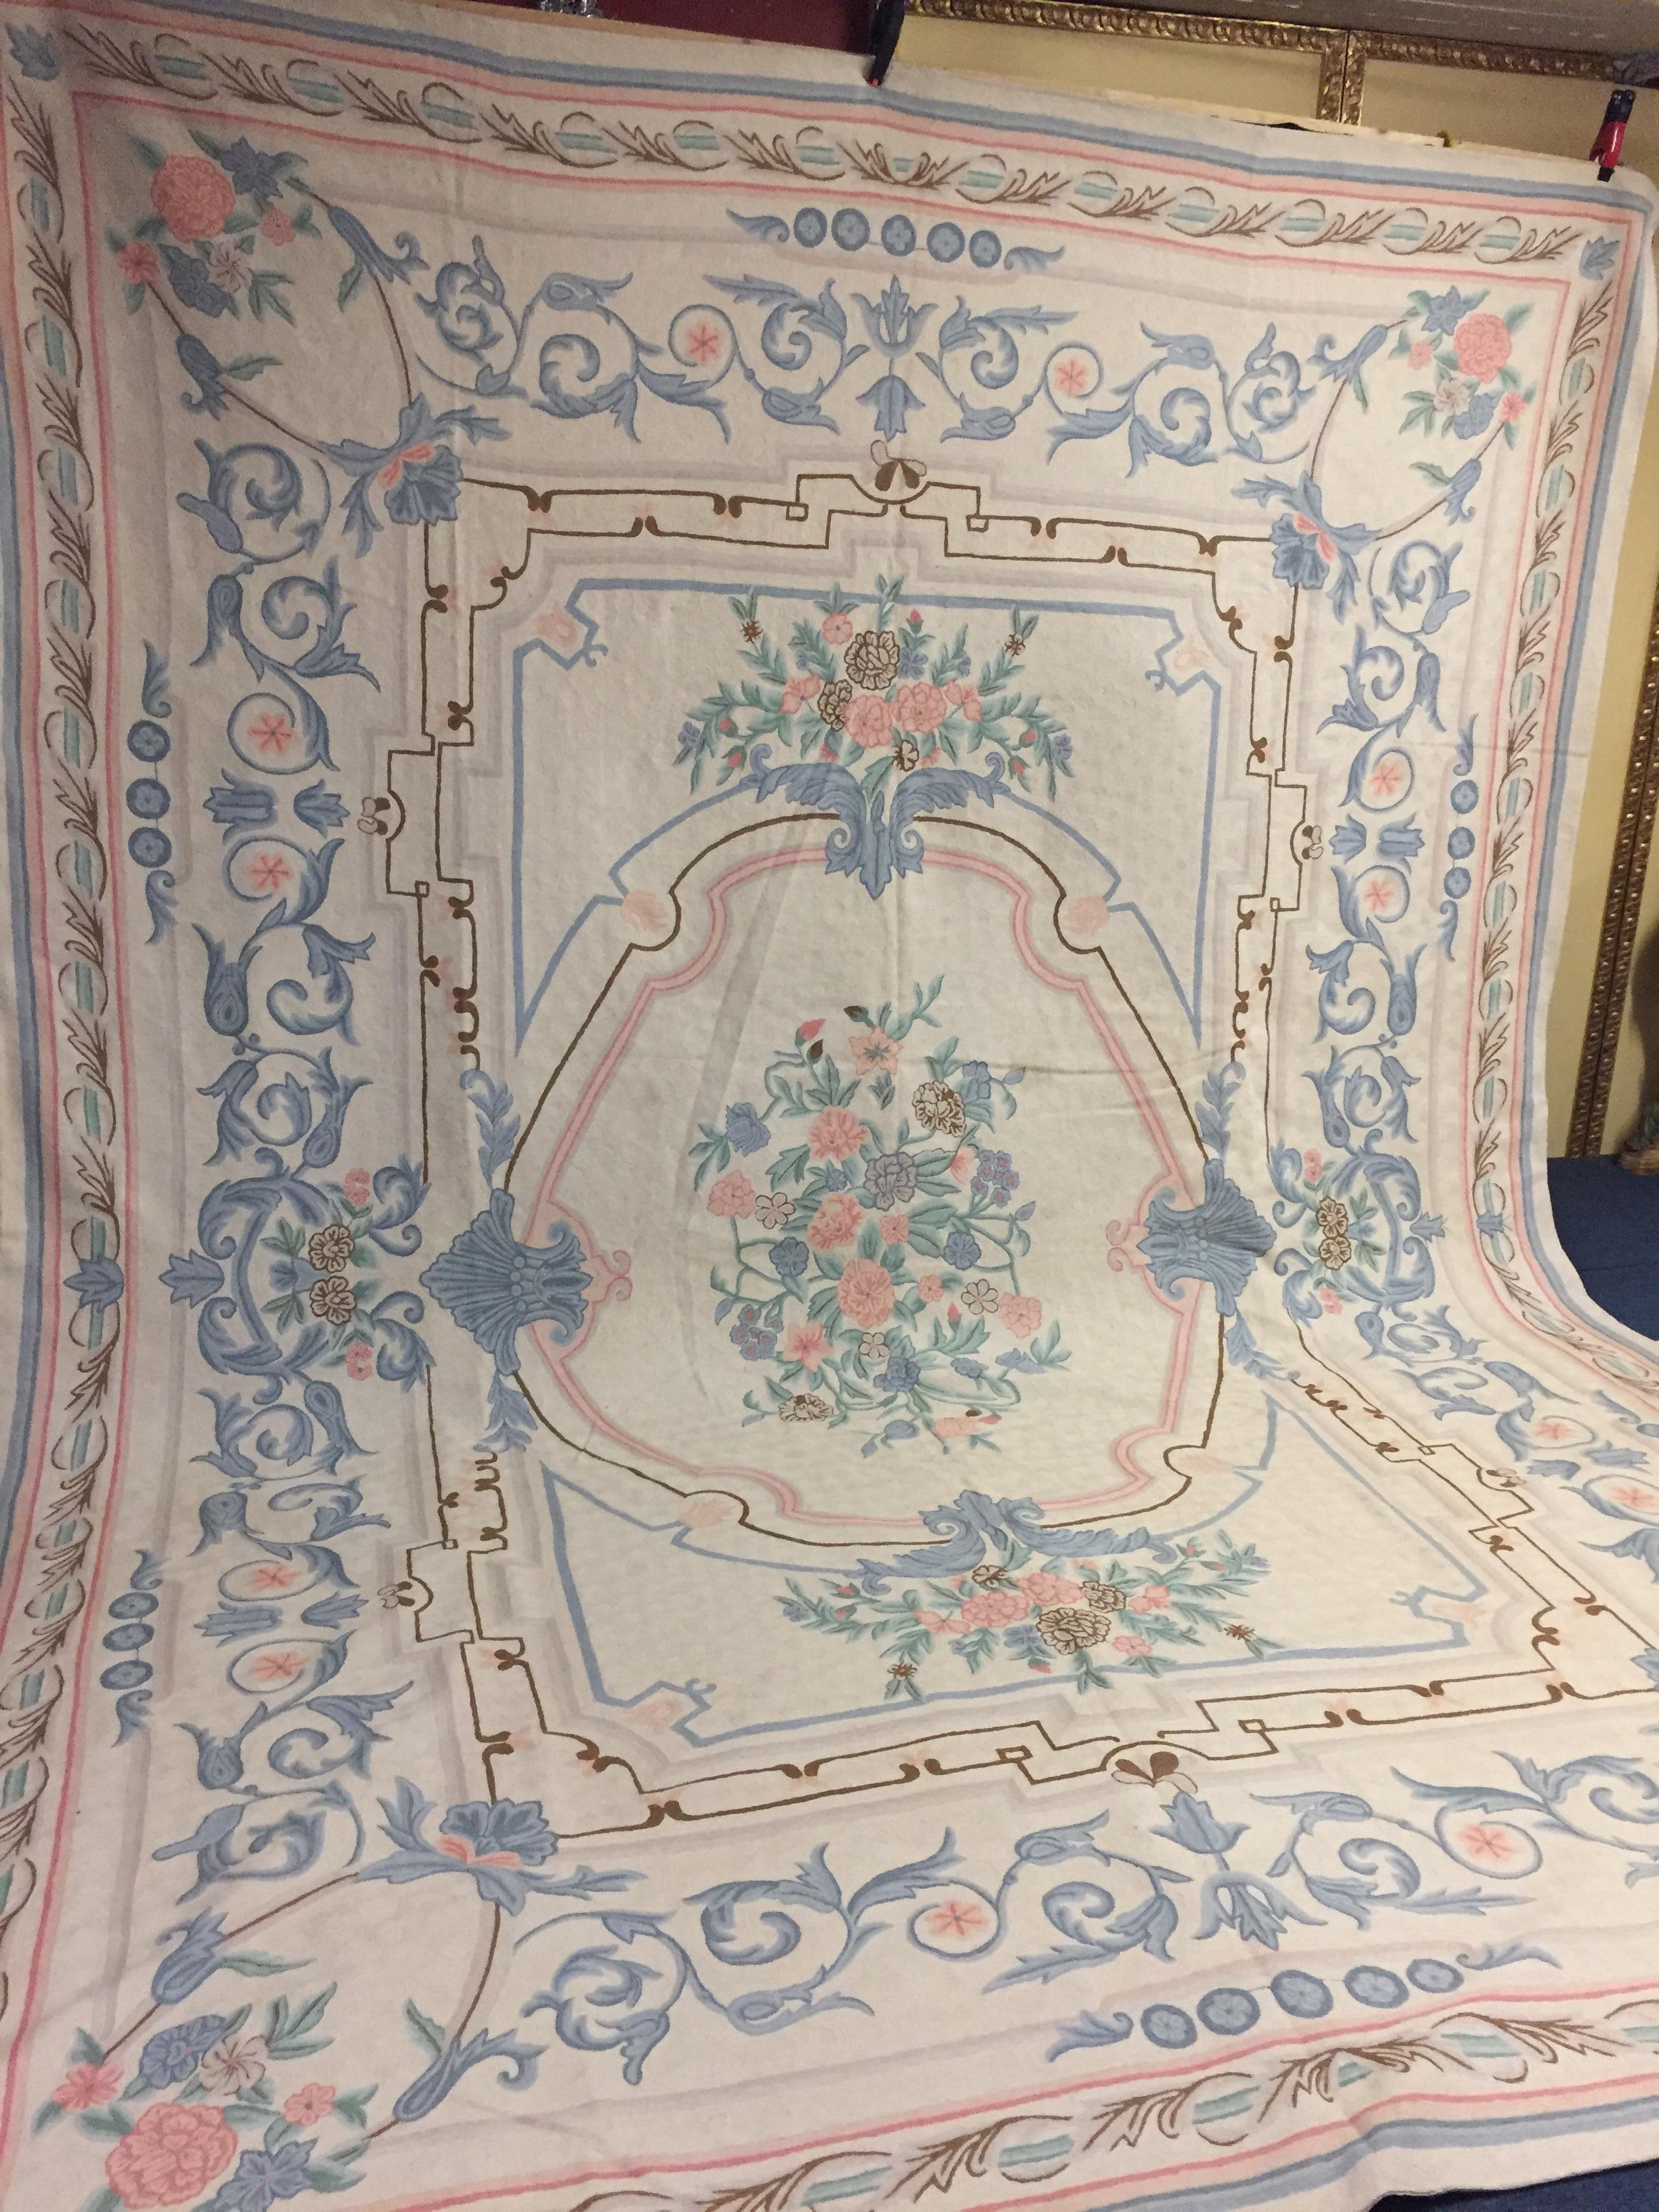 Wonderful 1990 Indian copy of a French Aubusson flat handwoven tapestry rug of elegant design with subdued colors and delicate floral motifs. Rich and soft ivory ground decorated around a centered floral medallion banded with floral sprays and